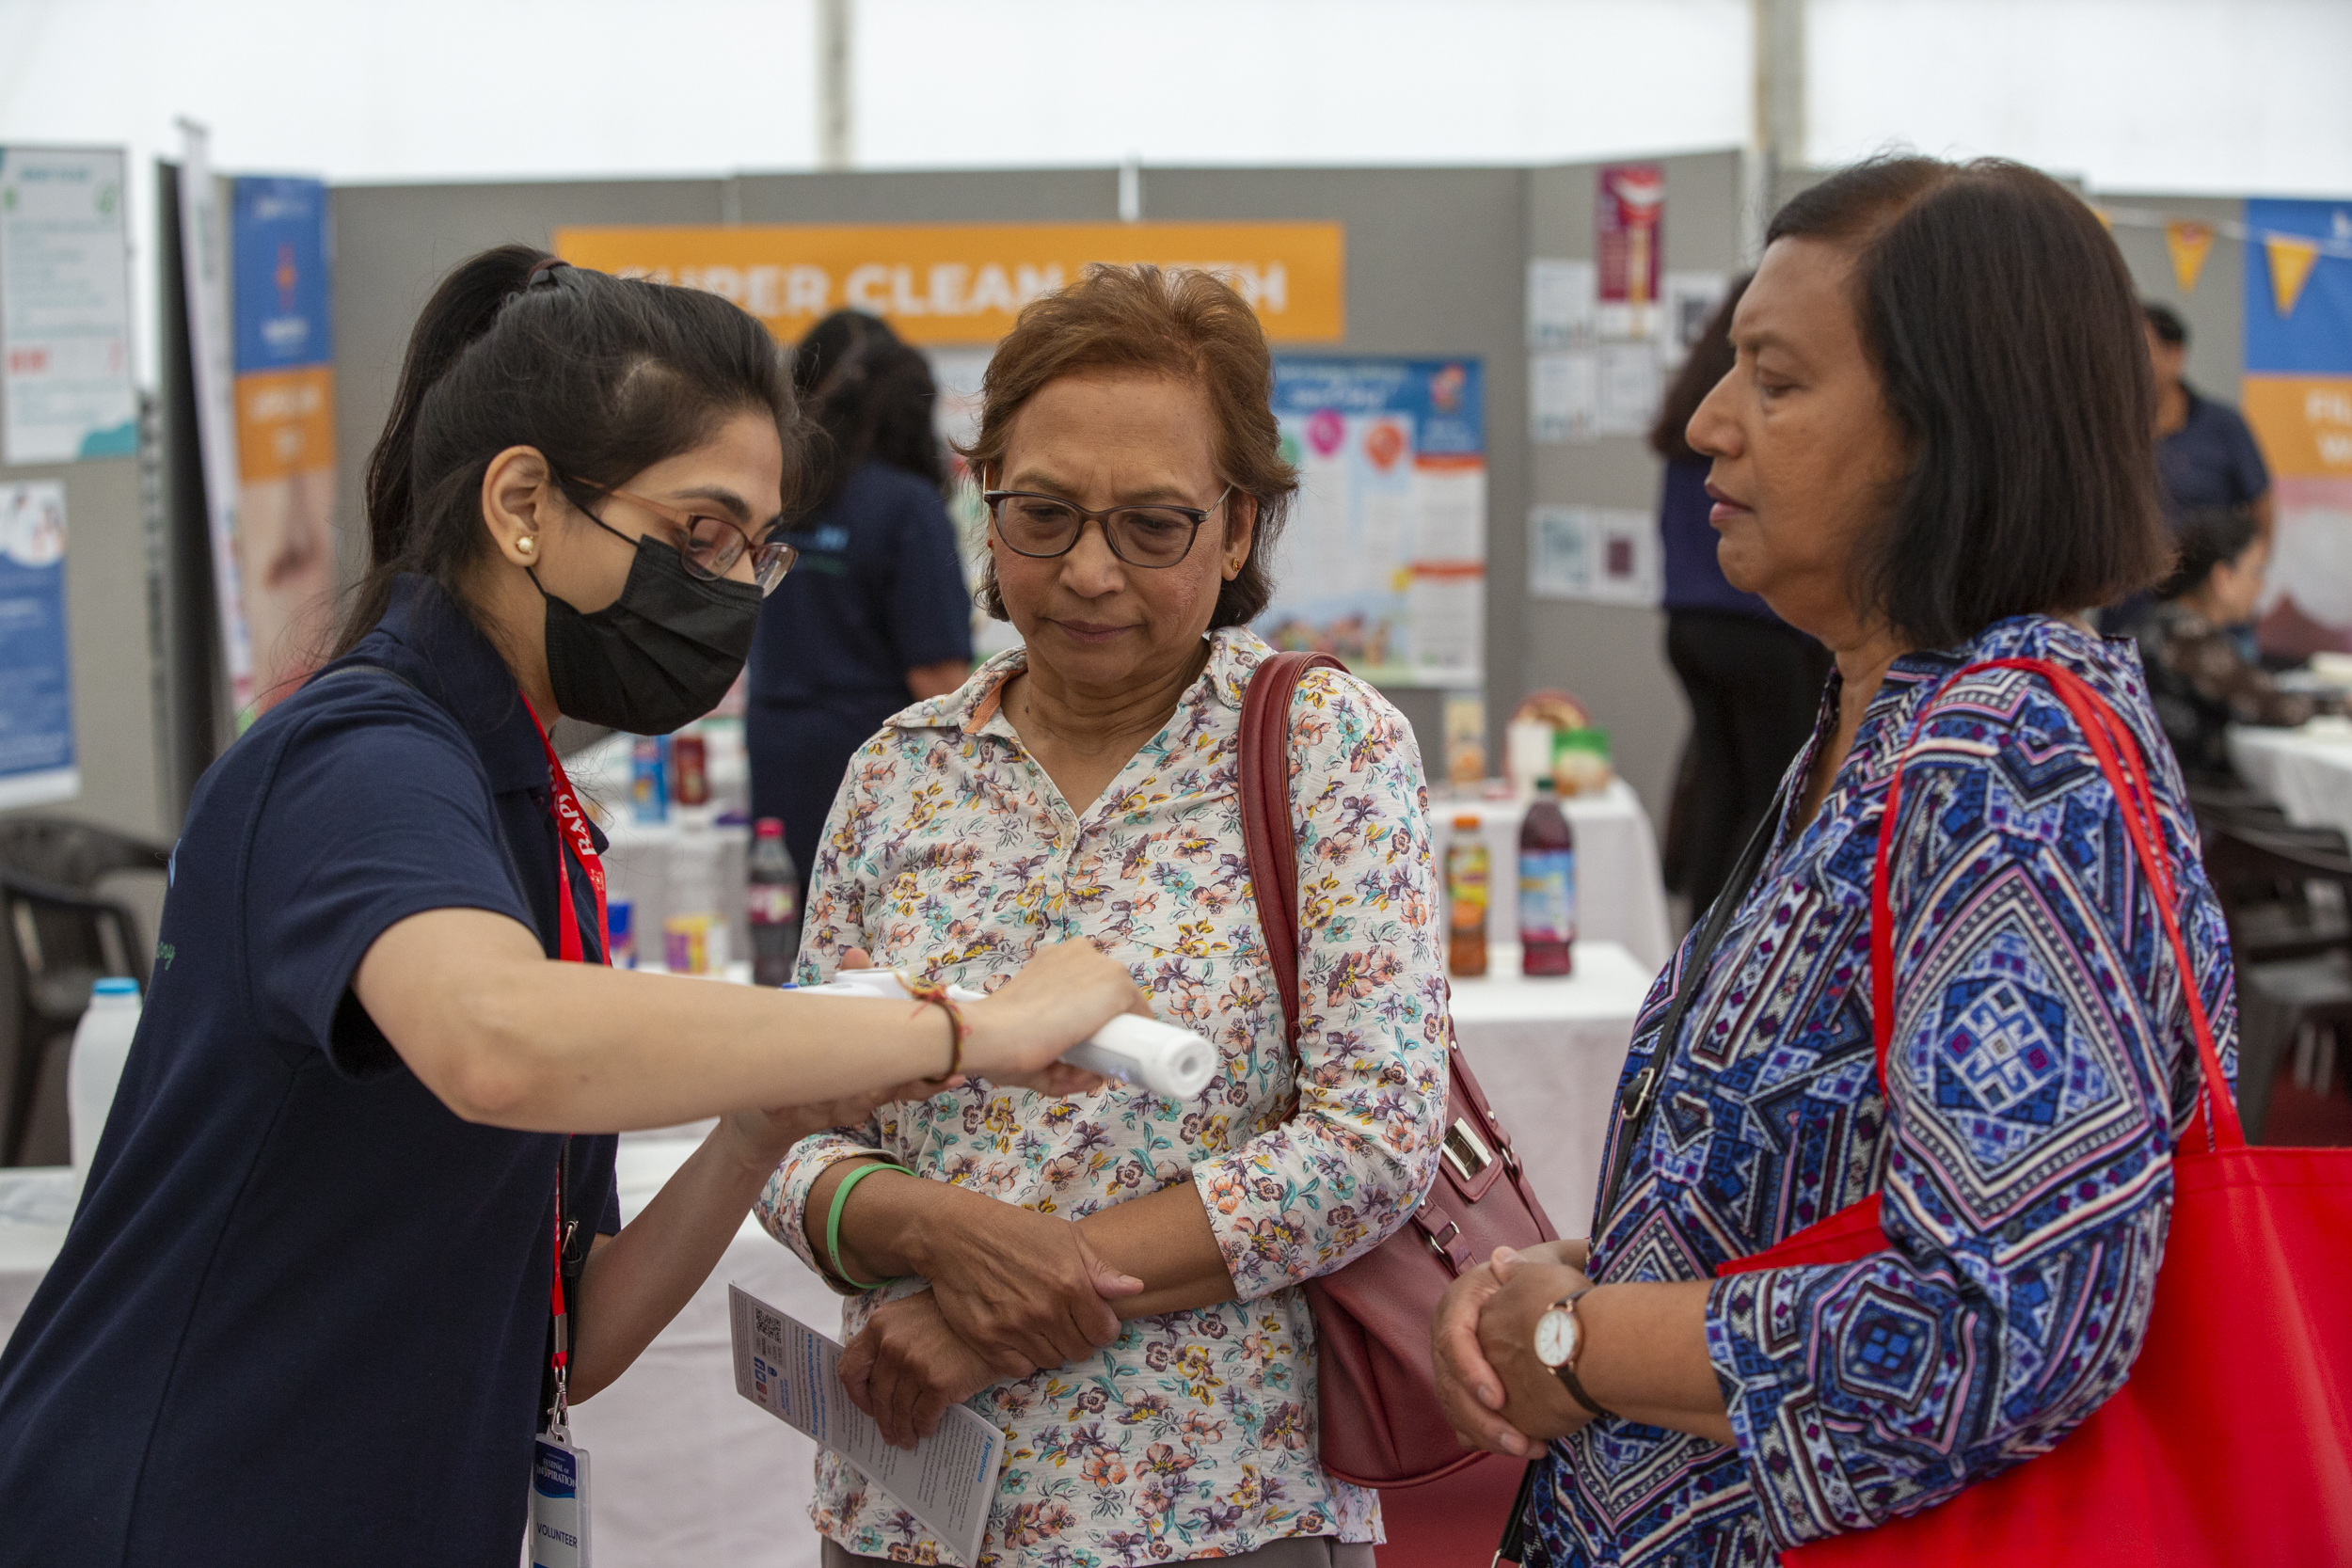 BSP helps Dental Awareness Day at Festival of Inspiration’s Health Hub